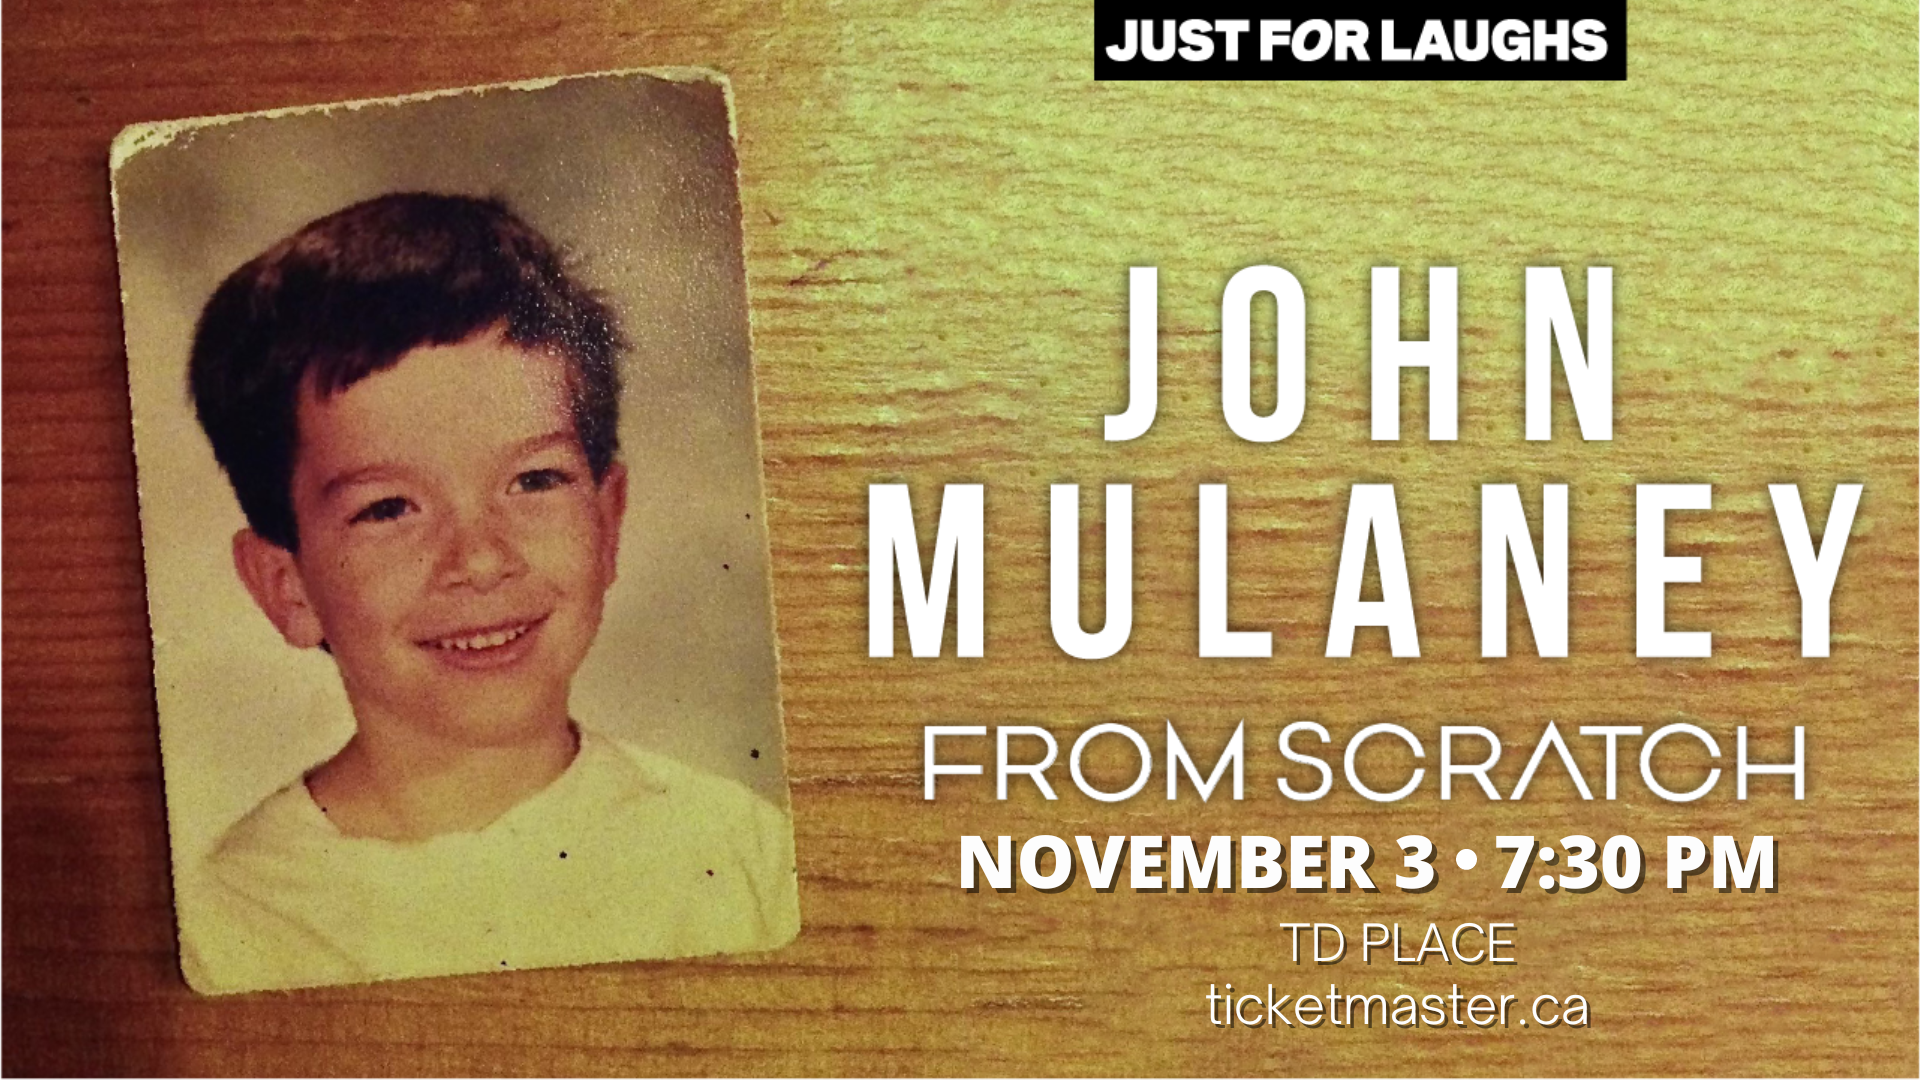 John Mulaney – From Scratch Tour